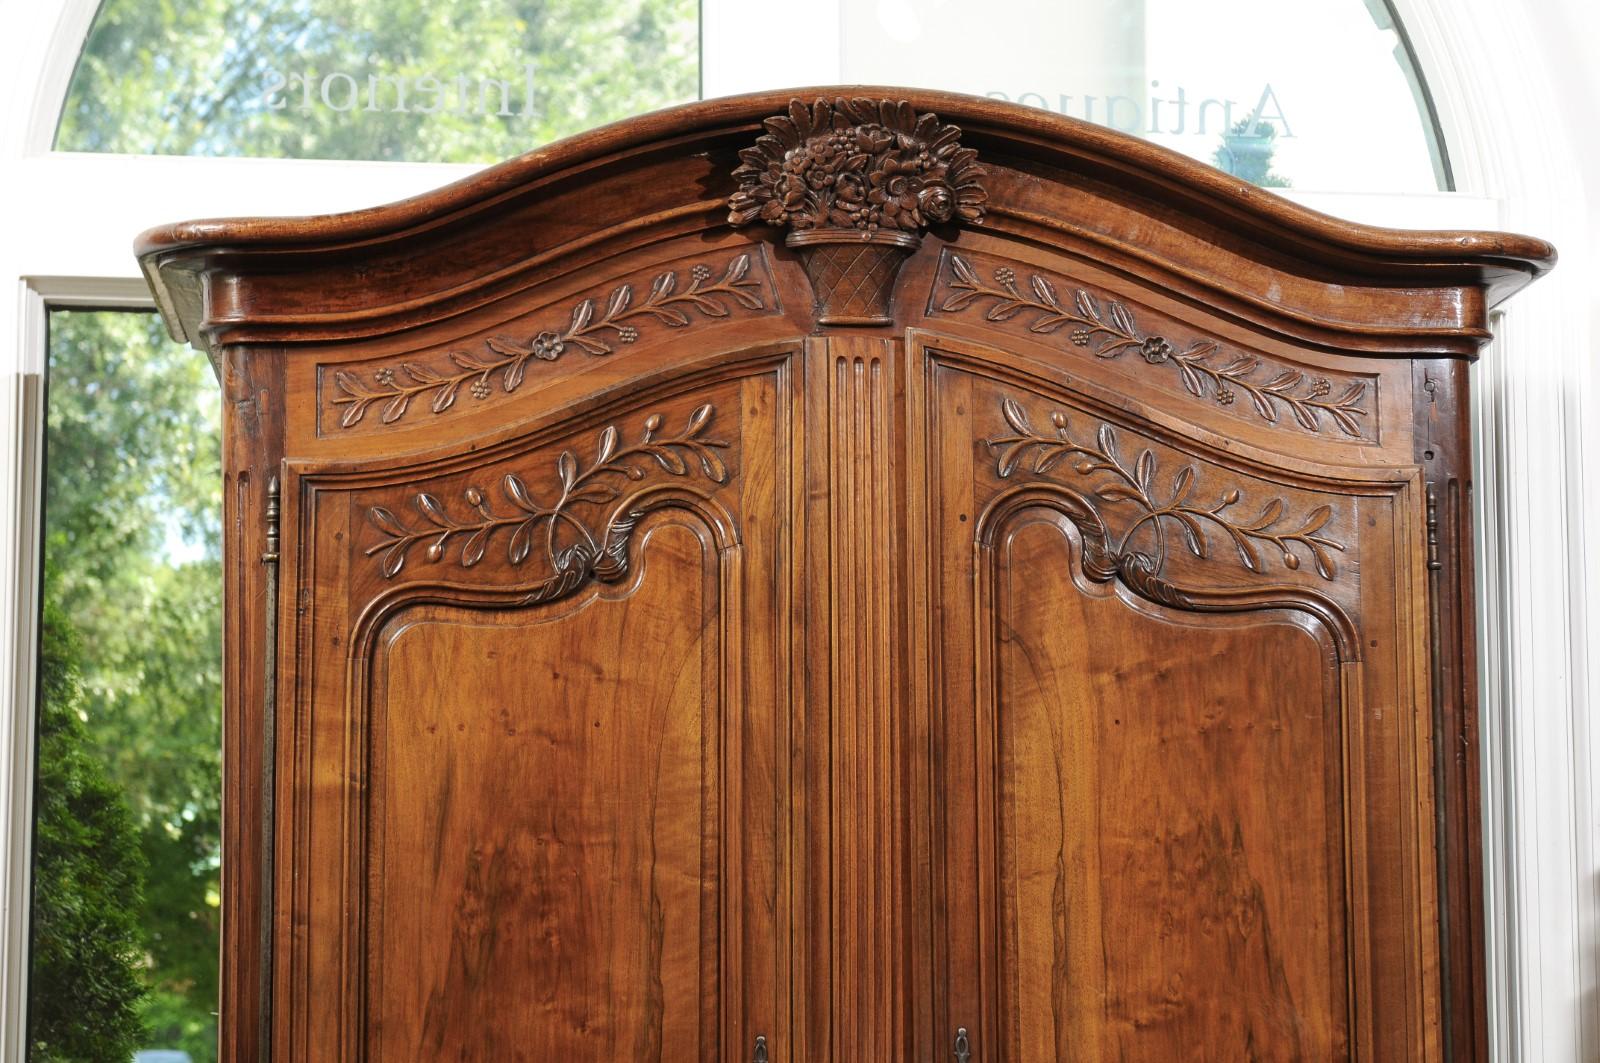 Hand-Carved French 1750s Louis XV Period Walnut Armoire from Provence with Foliage Motifs